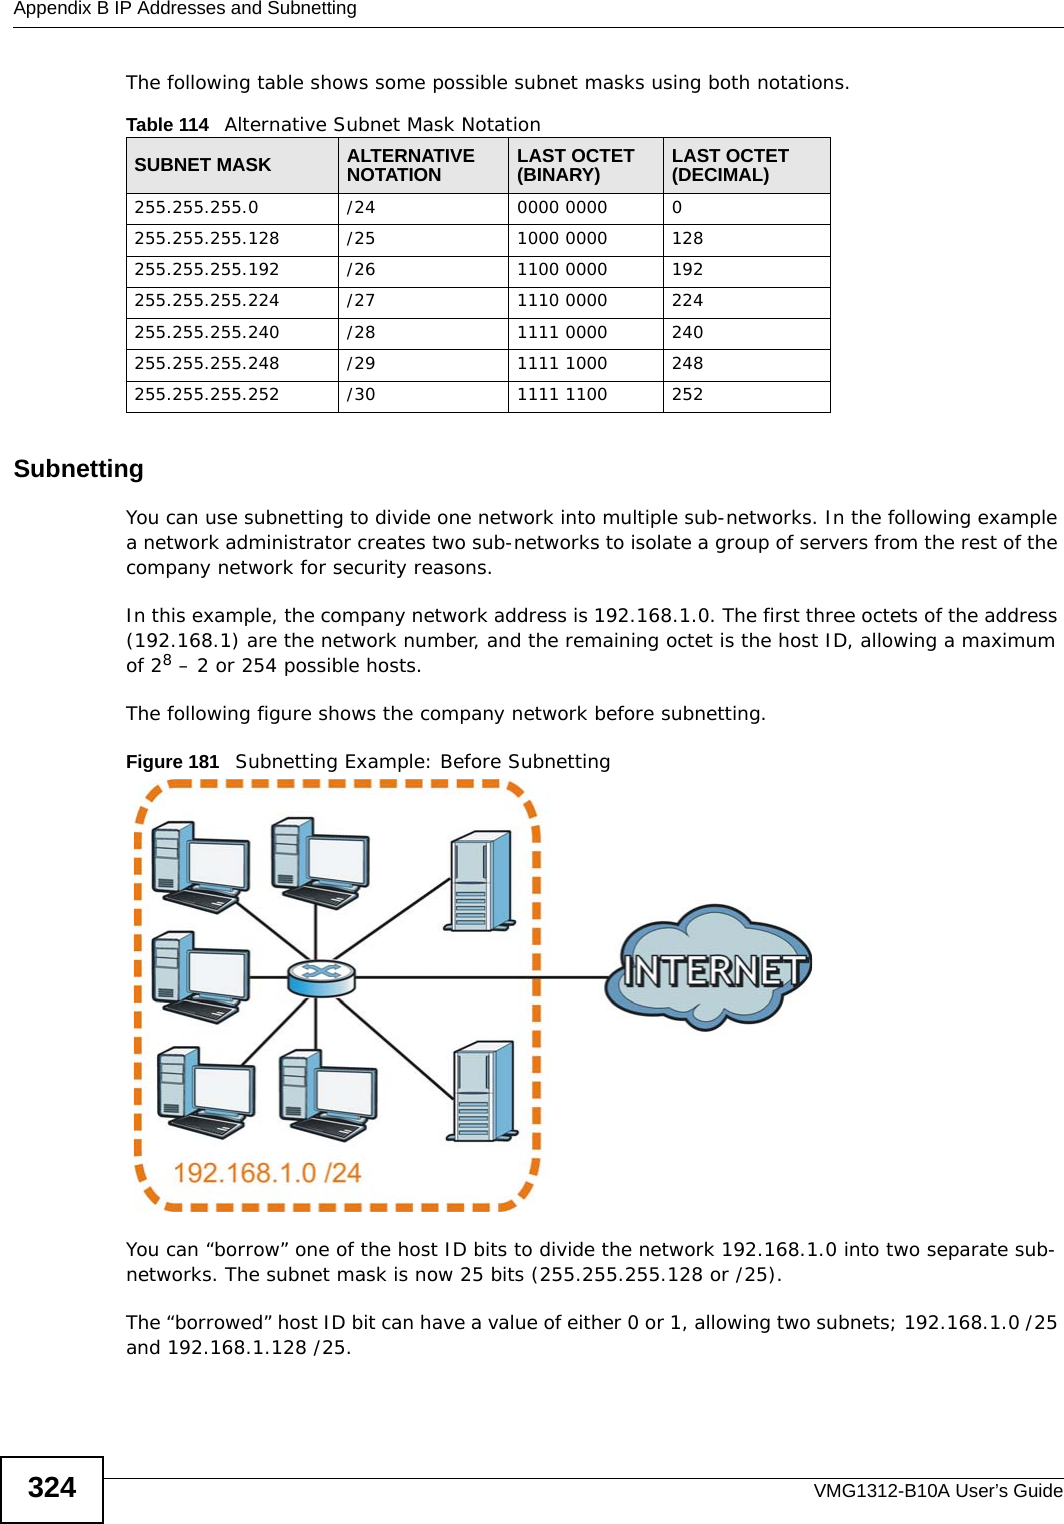 Appendix B IP Addresses and SubnettingVMG1312-B10A User’s Guide324The following table shows some possible subnet masks using both notations. SubnettingYou can use subnetting to divide one network into multiple sub-networks. In the following example a network administrator creates two sub-networks to isolate a group of servers from the rest of the company network for security reasons.In this example, the company network address is 192.168.1.0. The first three octets of the address (192.168.1) are the network number, and the remaining octet is the host ID, allowing a maximum of 28 – 2 or 254 possible hosts.The following figure shows the company network before subnetting.  Figure 181   Subnetting Example: Before SubnettingYou can “borrow” one of the host ID bits to divide the network 192.168.1.0 into two separate sub-networks. The subnet mask is now 25 bits (255.255.255.128 or /25).The “borrowed” host ID bit can have a value of either 0 or 1, allowing two subnets; 192.168.1.0 /25 and 192.168.1.128 /25. Table 114   Alternative Subnet Mask NotationSUBNET MASK ALTERNATIVE NOTATION LAST OCTET (BINARY) LAST OCTET (DECIMAL)255.255.255.0 /24 0000 0000 0255.255.255.128 /25 1000 0000 128255.255.255.192 /26 1100 0000 192255.255.255.224 /27 1110 0000 224255.255.255.240 /28 1111 0000 240255.255.255.248 /29 1111 1000 248255.255.255.252 /30 1111 1100 252